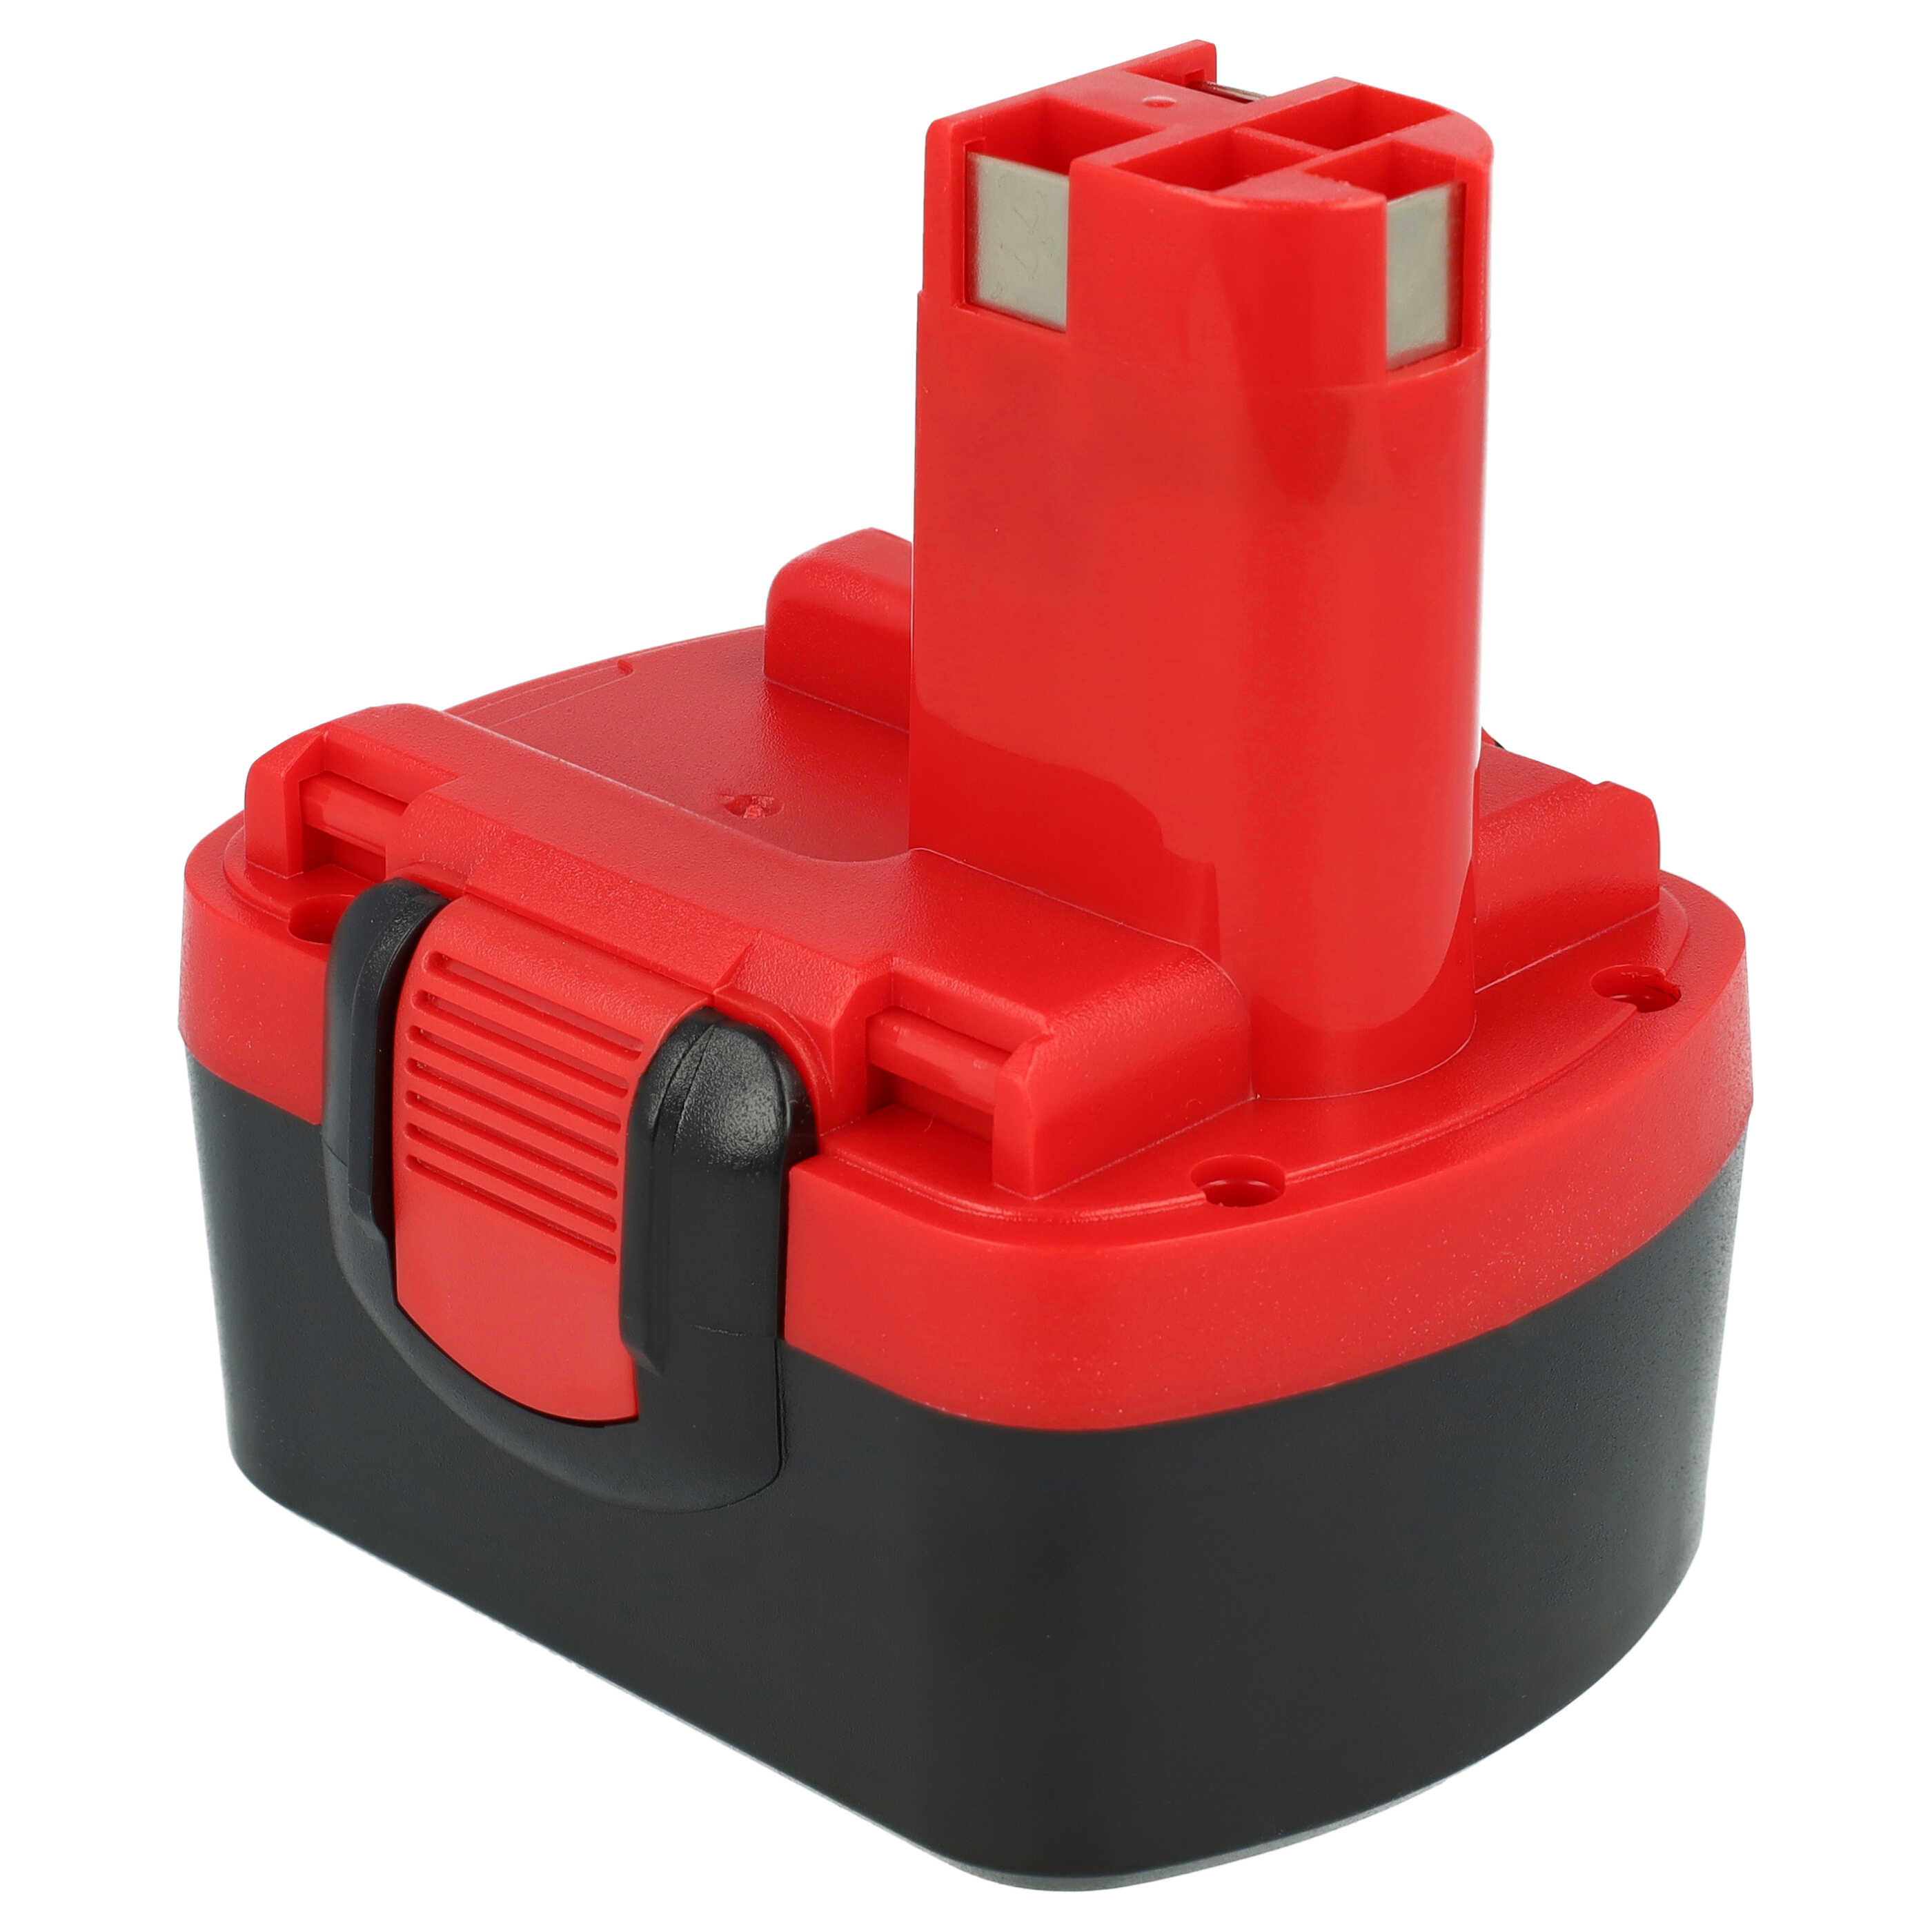 Electric Power Tool Battery Replaces Bosch 2 607 335 264, 2 607 335 263, 1617S0004W - 2500 mAh, 14.4 V, NiMH